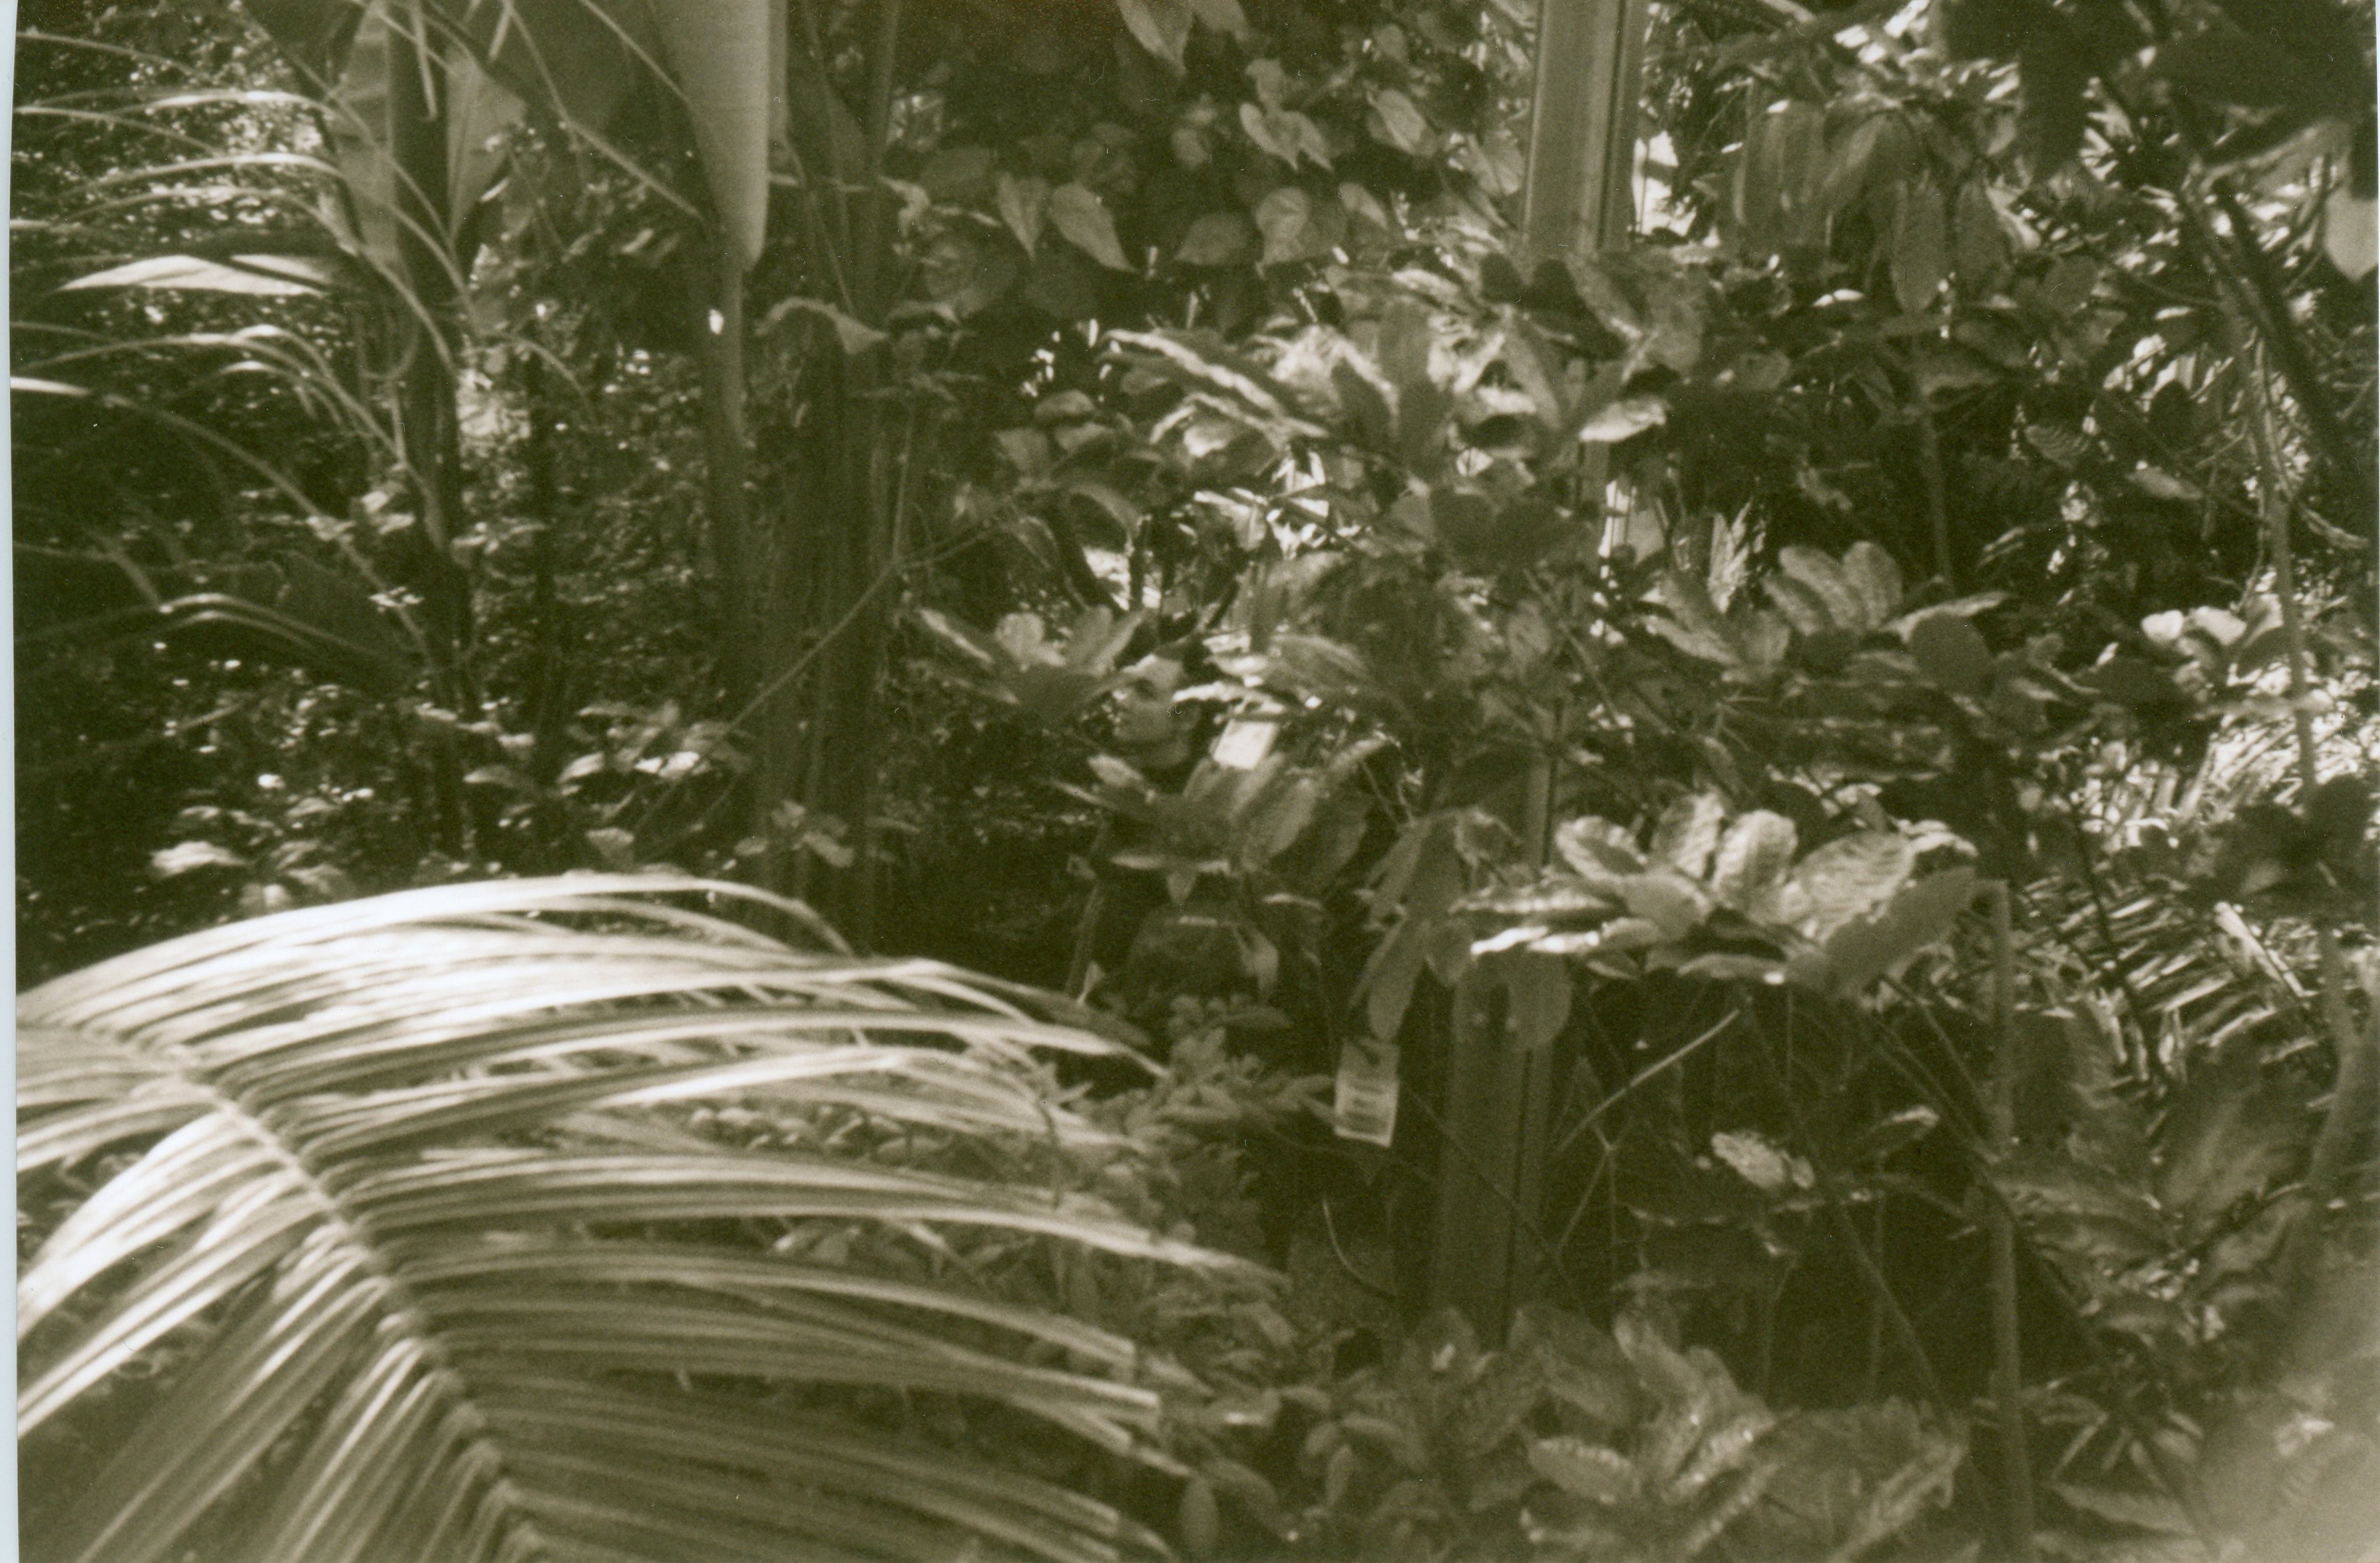 a black and white, sepia toned, 35mm print; the entire frame is filled with greenery and a person is barely viable in the center of the frame; there is a large, brightly lit palm frond in the bottom left quadrant curved towards the camera in the foreground, and everything else is set at the mid-ground and is slightly more shaded but still sunny